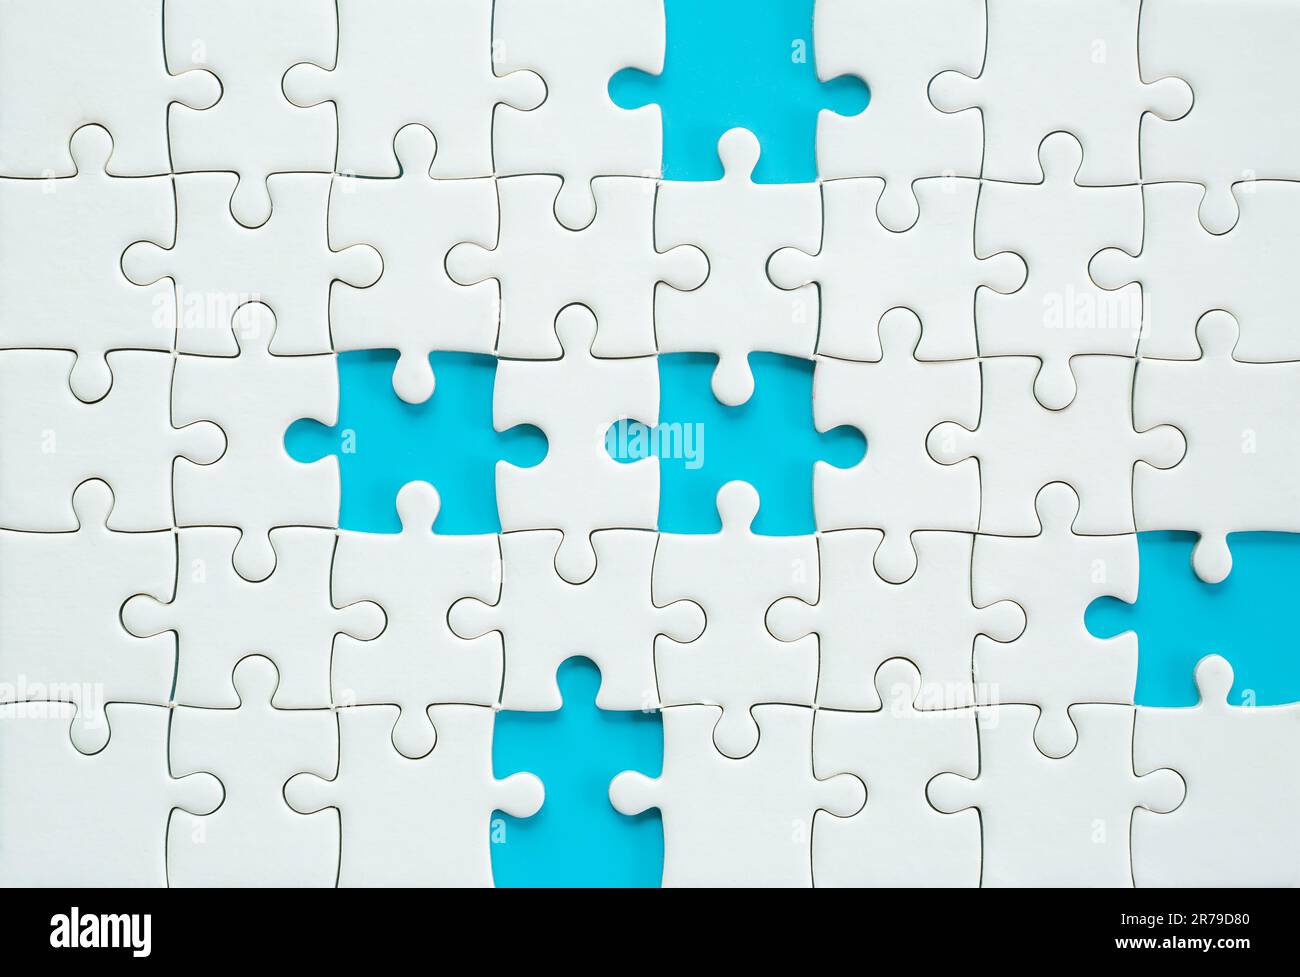 White part of jigsaw puzzle pieces on blue background. concepts of problem solving, business success, teamwork, Team playing jigsaw game incomplete, T Stock Photo